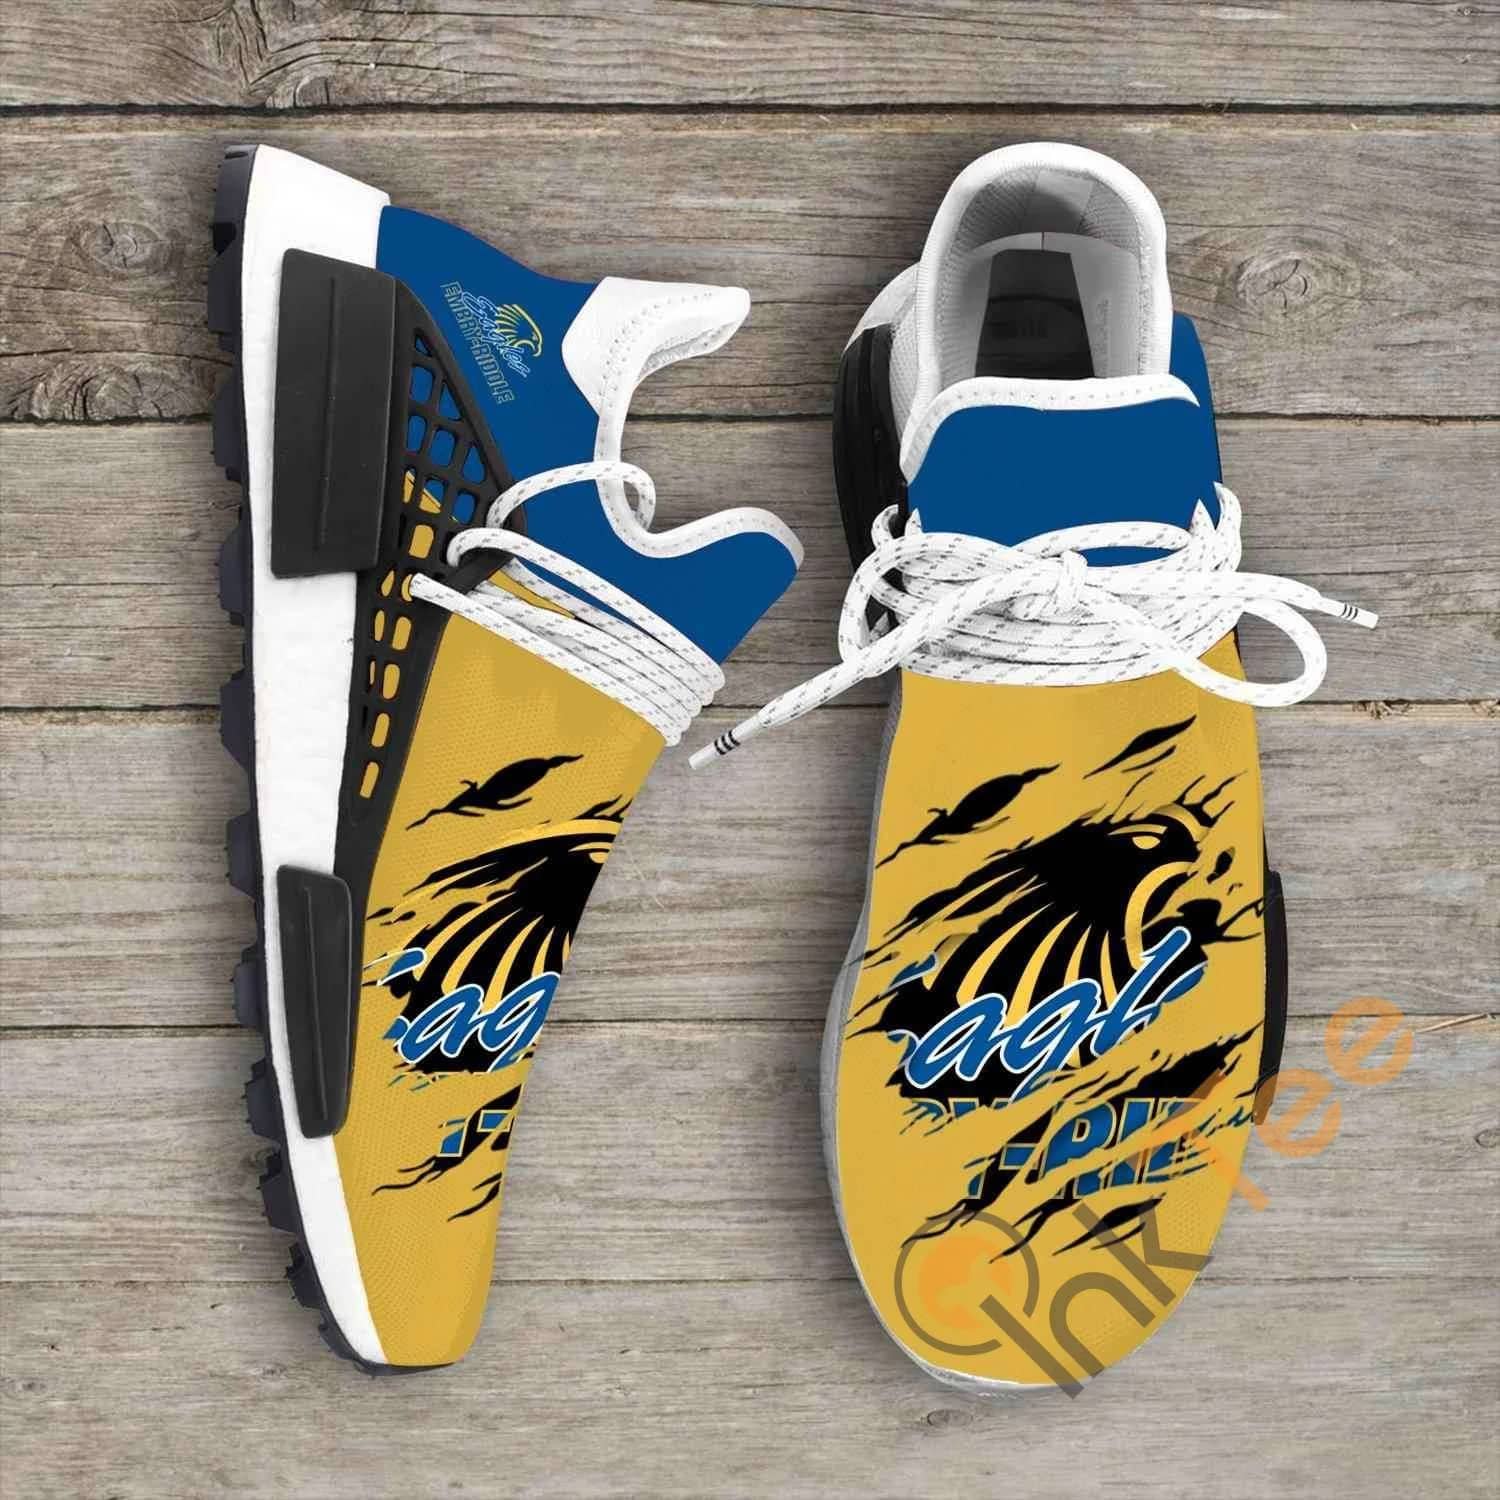 Embry Riddle Eagles Ncaa Sport Teams Nmd Human Shoes